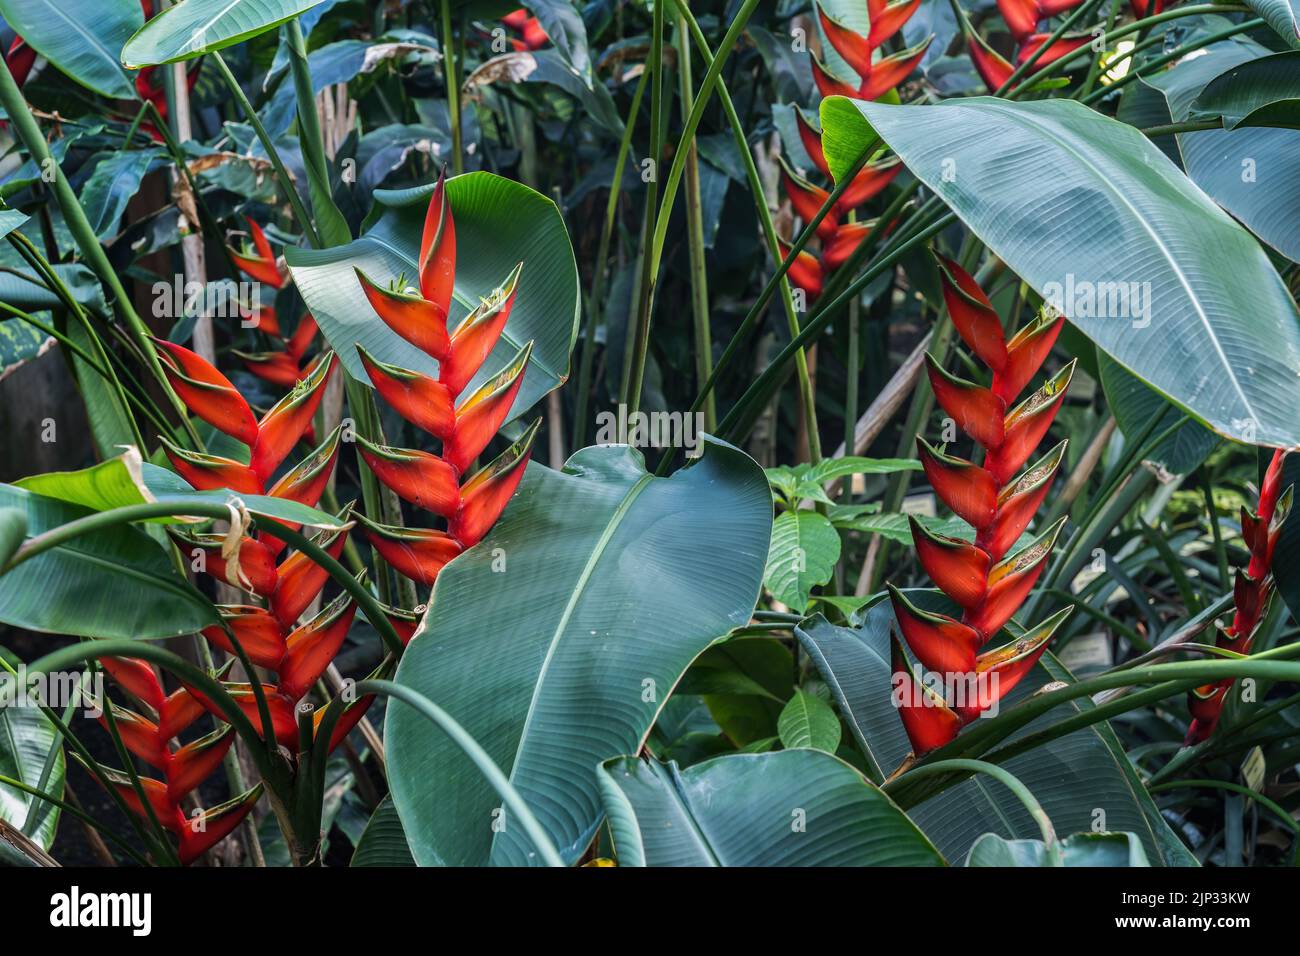 Heliconia bihai, Red Palulu,Macaw Flower or Firebird, flowering plant in the family Heliconiaceae, native to the Caribbean and northern South America. Stock Photo